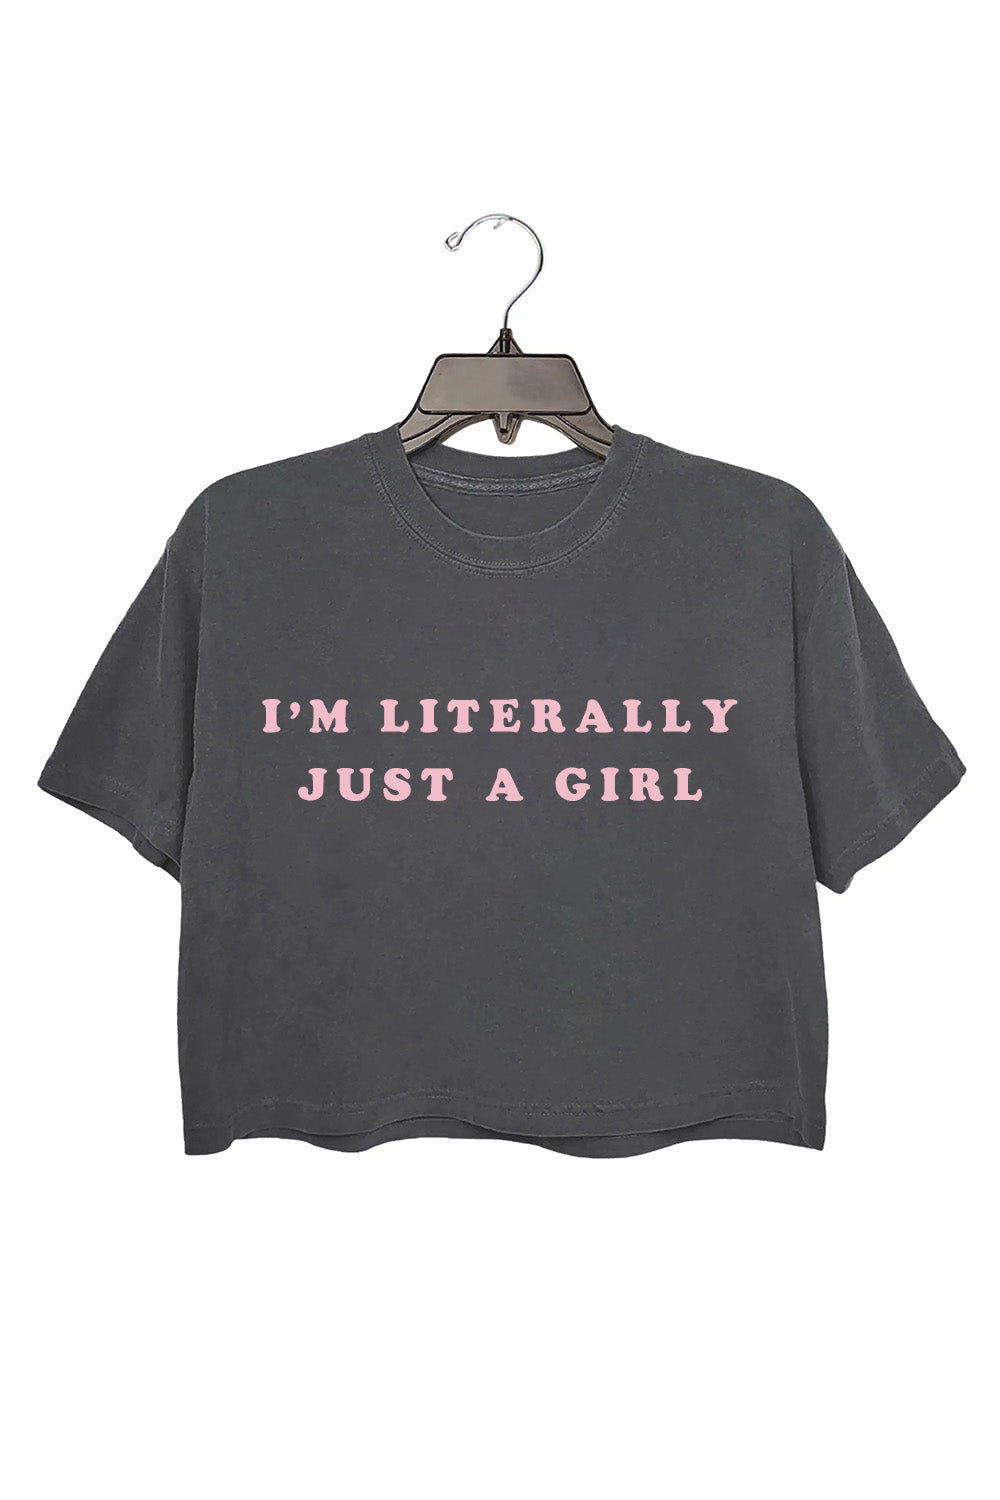 “I’m literally just a sirl” Crop Top For Women